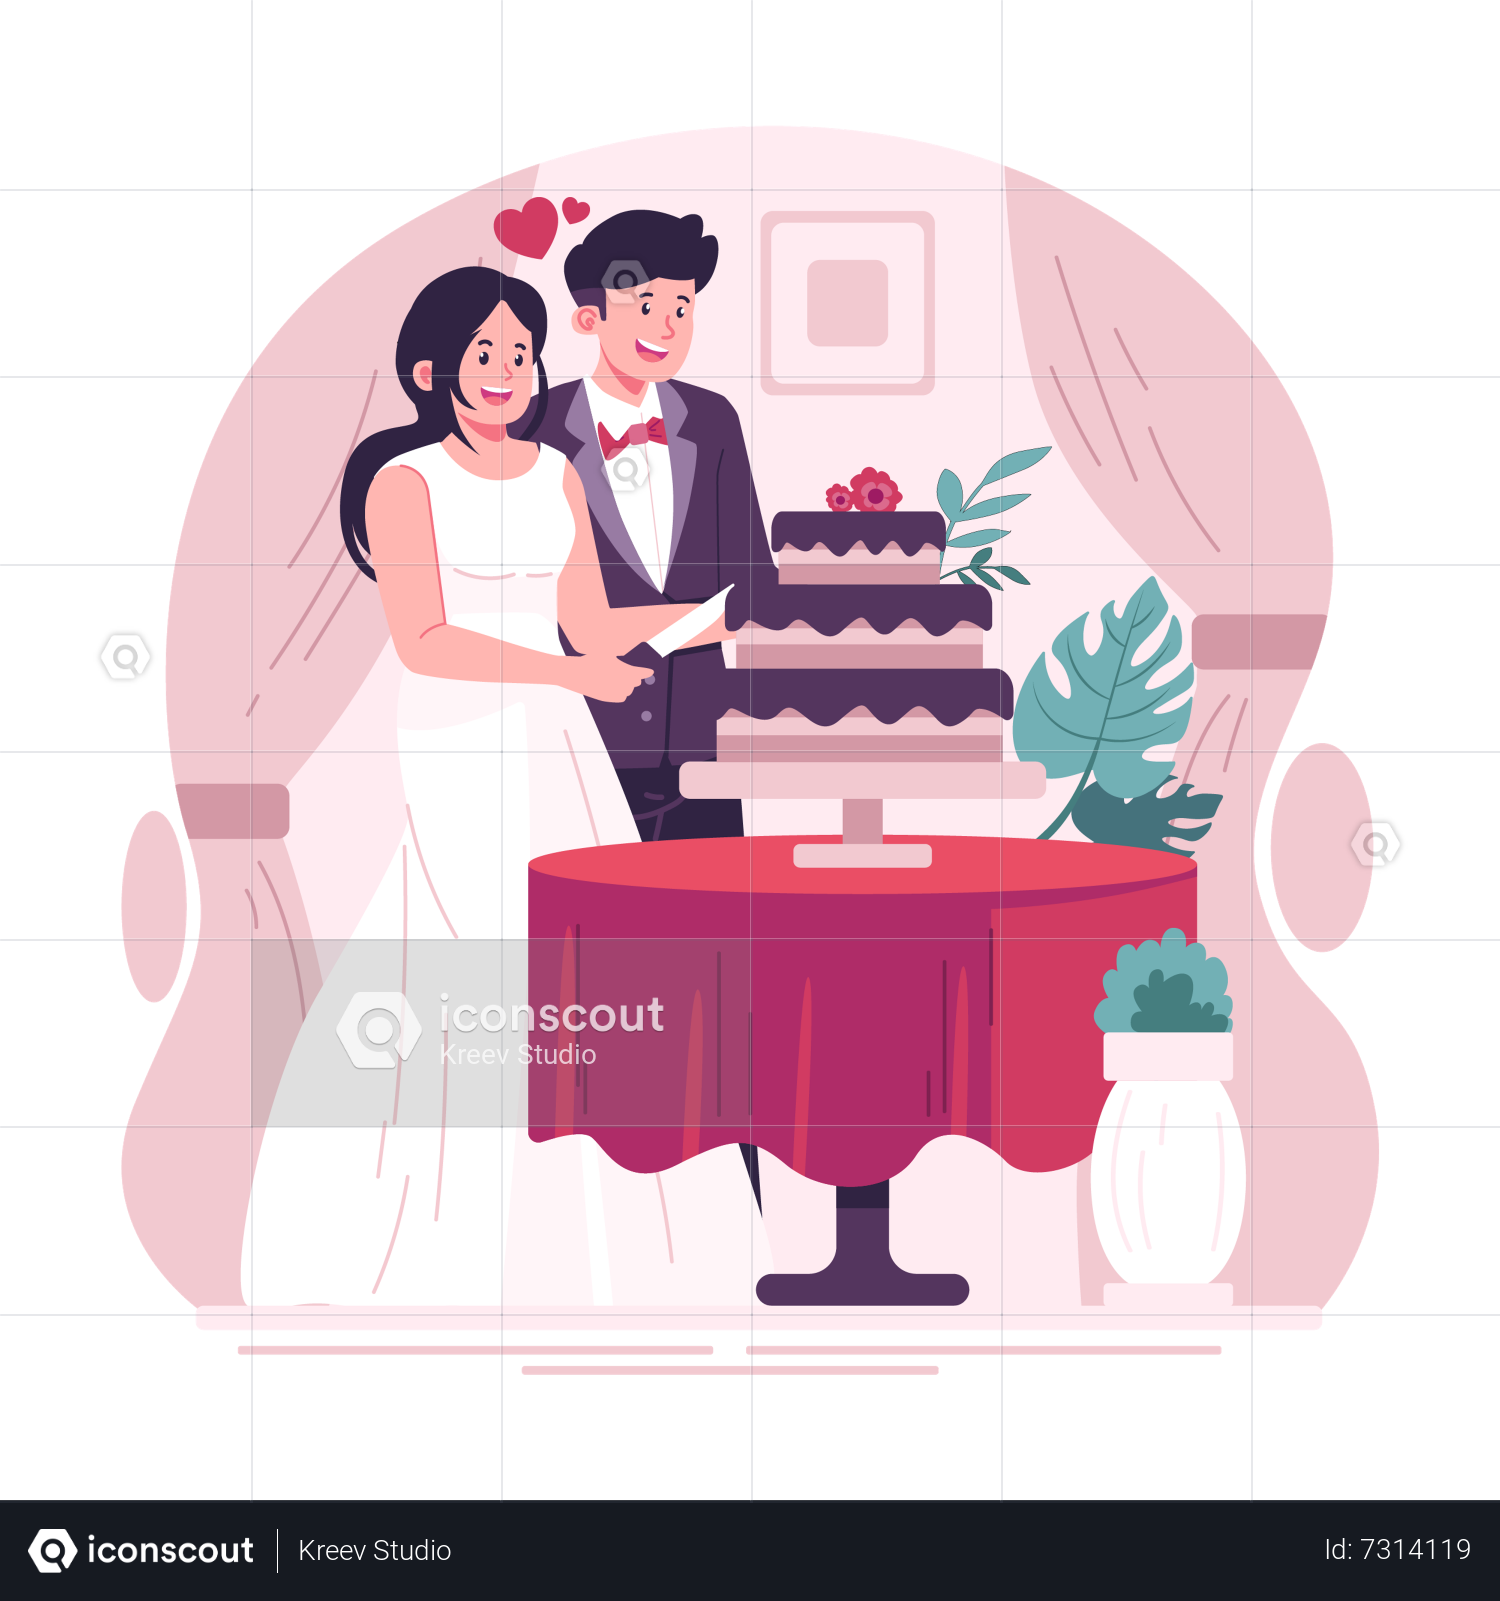 Wedding Cake Topper in Biscuit Stock Image - Image of brazil, decoration:  60829167